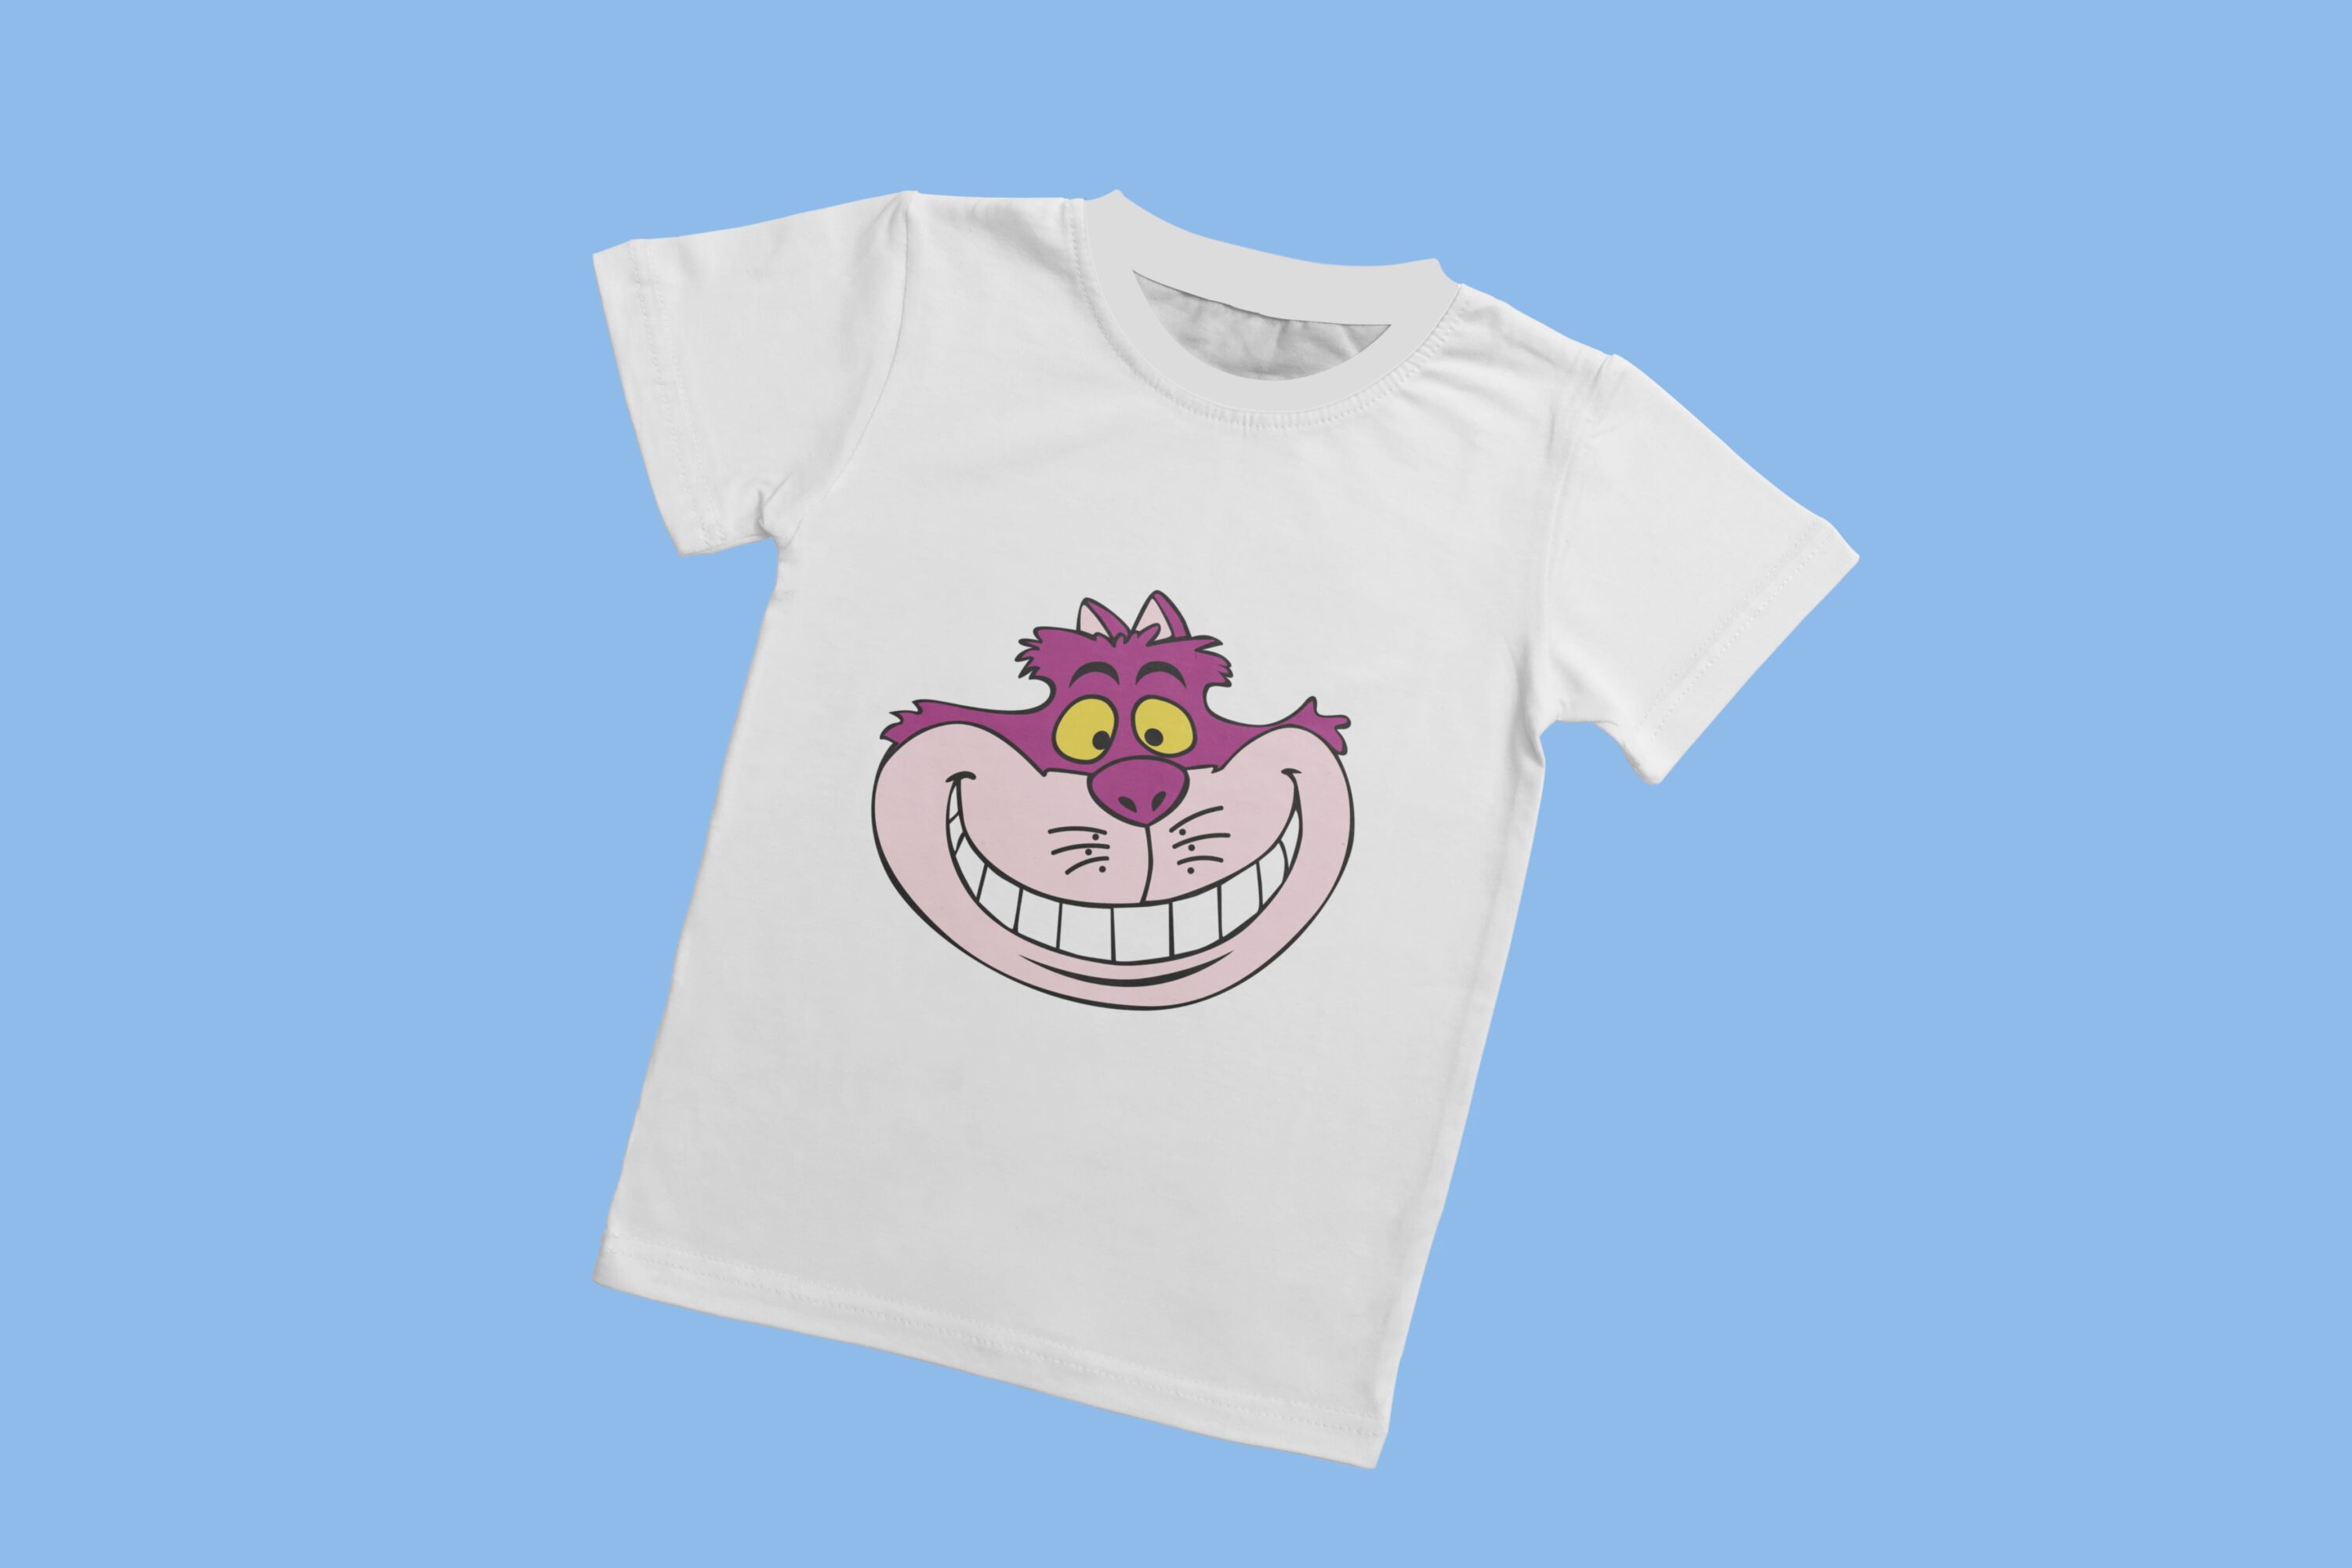 White T-shirt with a white collar and the face of a Cheshire cat with crossed eyes, on a blue background.